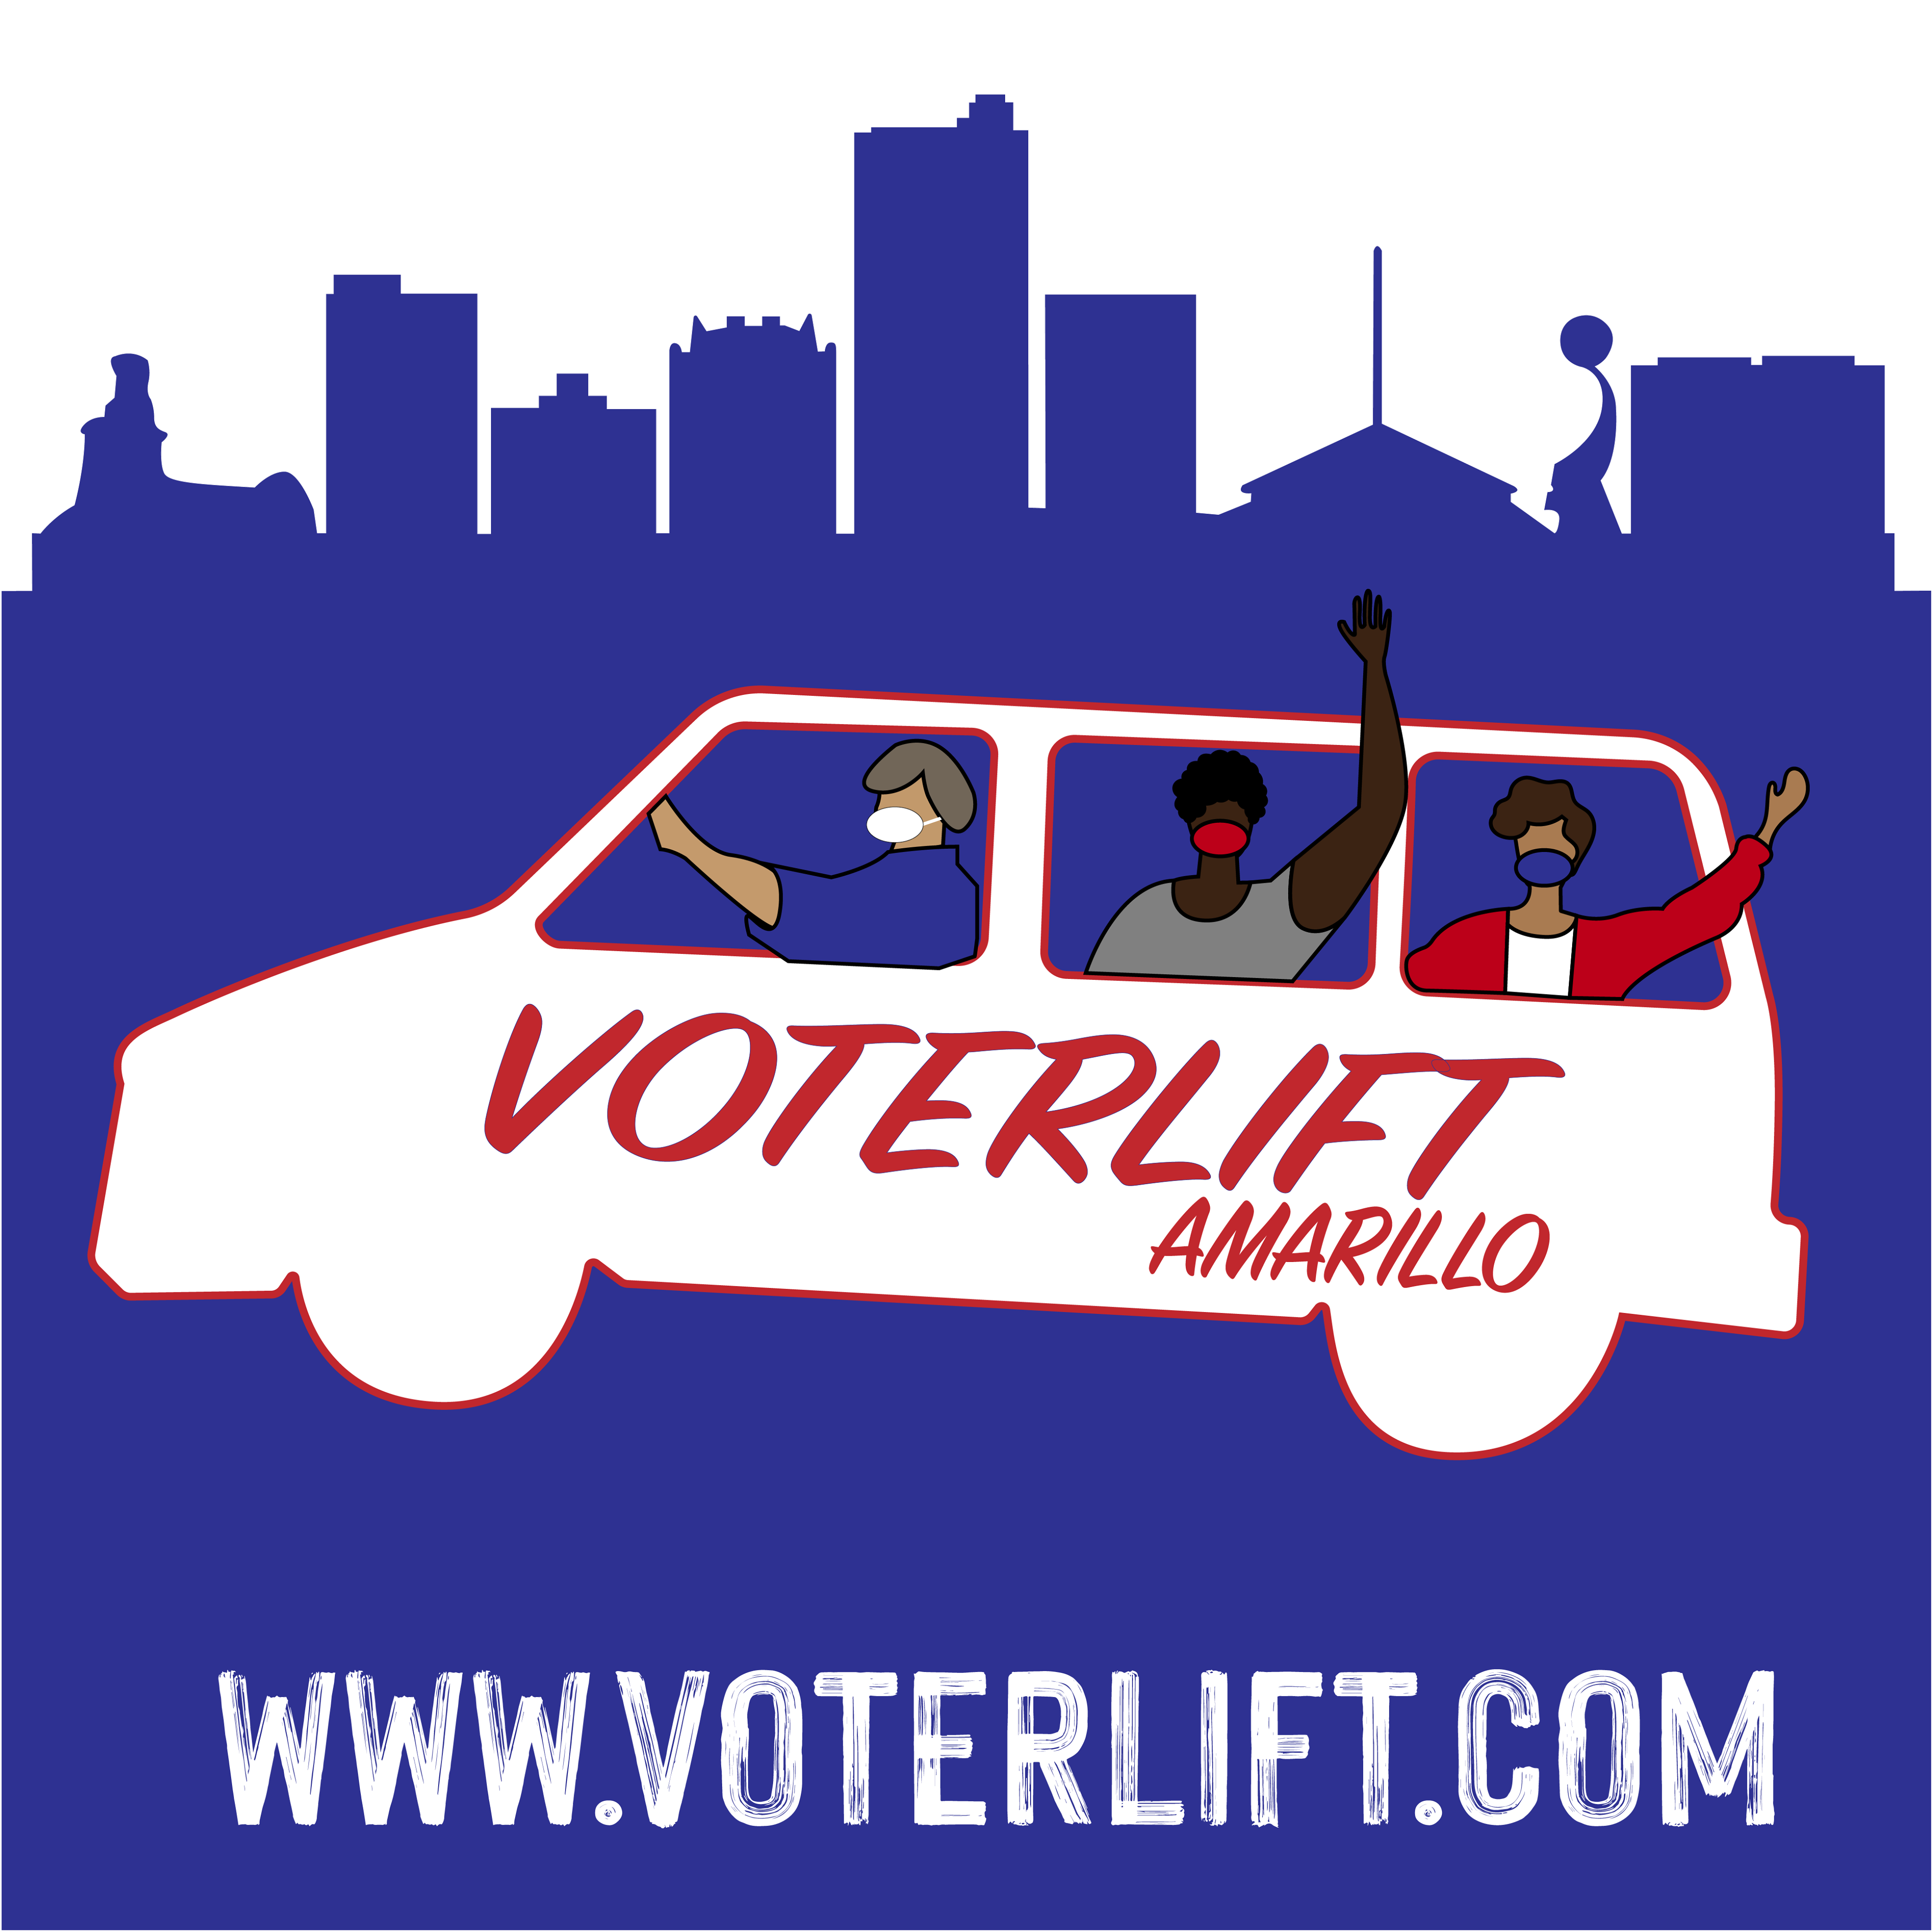 Text VoterLift Amarillo on an image of a van full of voters, safely masked, against a city skyline.